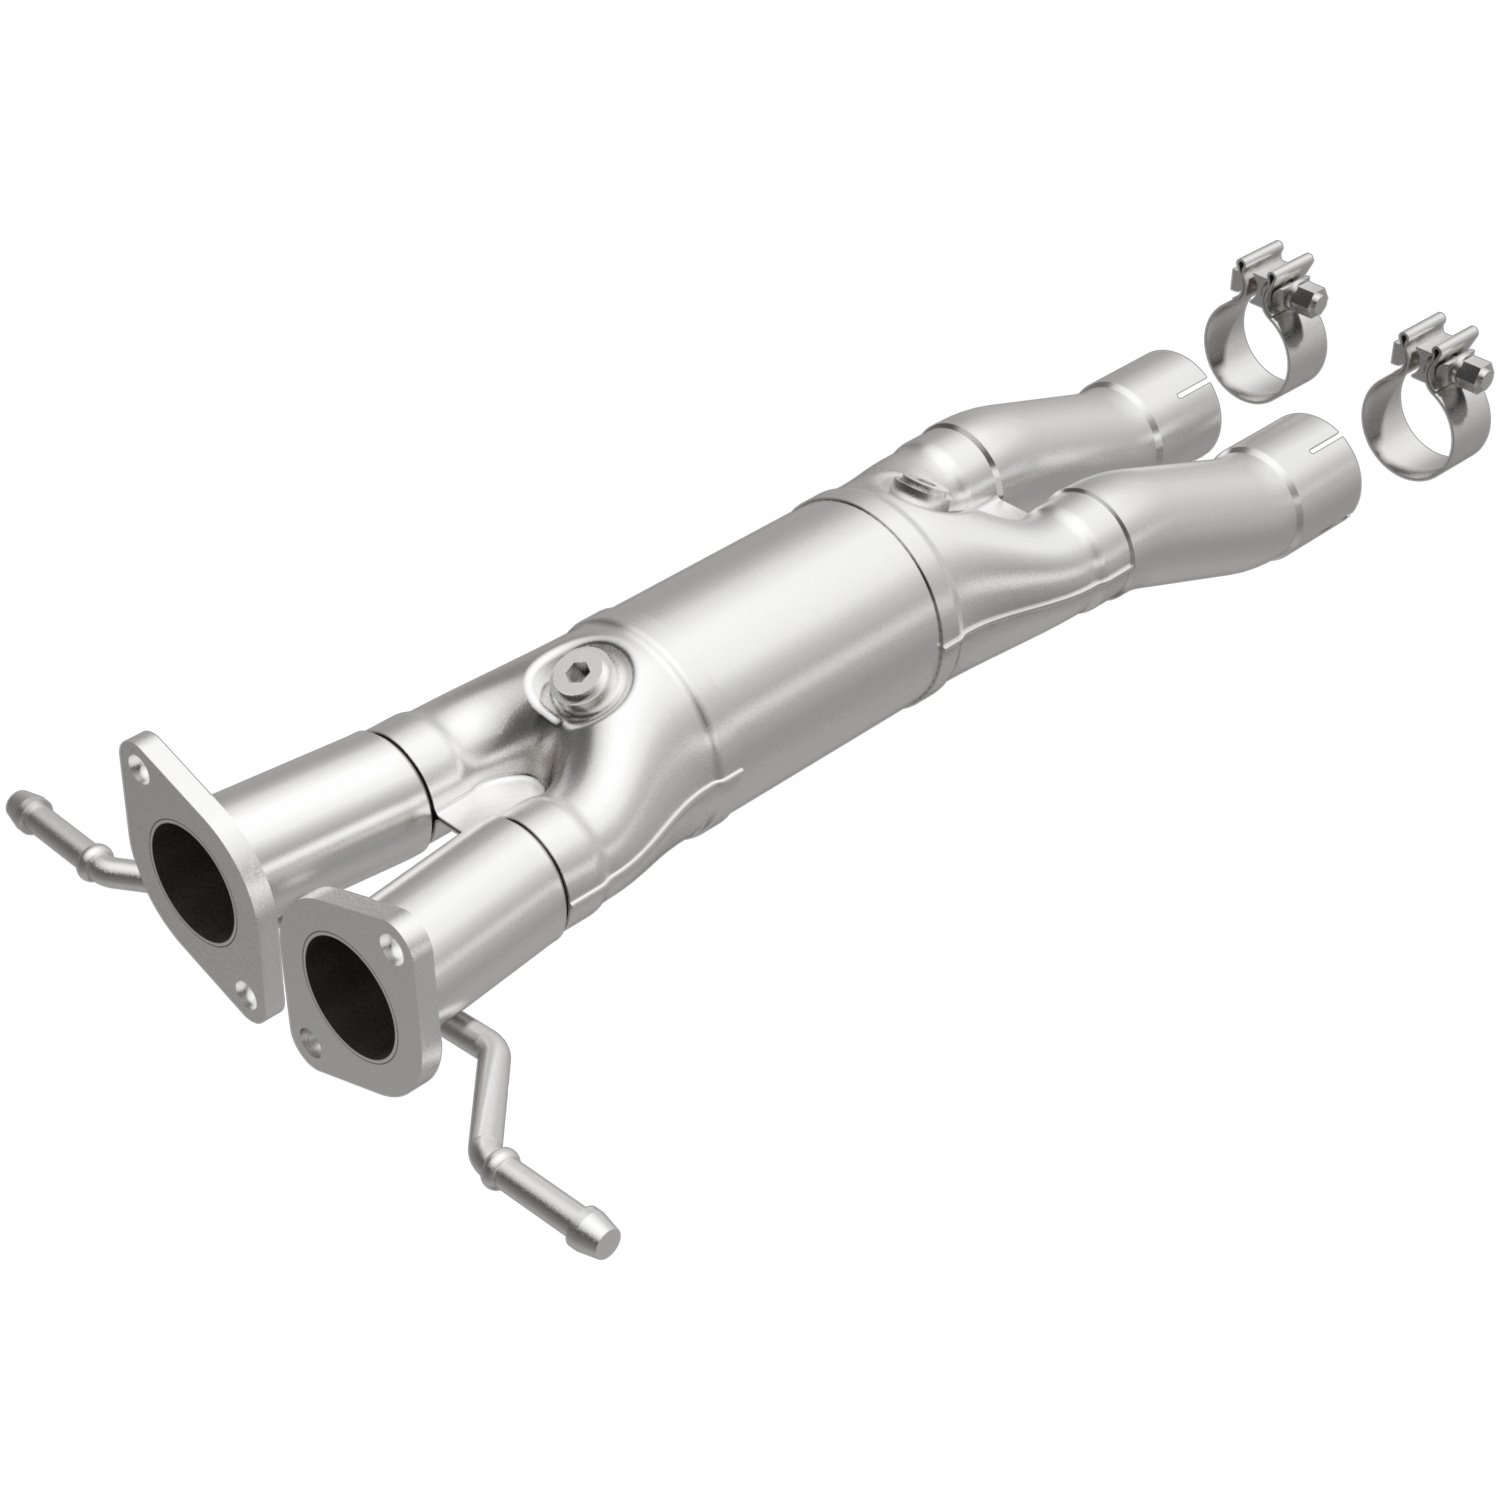 OEM Grade Federal / EPA Compliant Direct-Fit Catalytic Converter 21-020